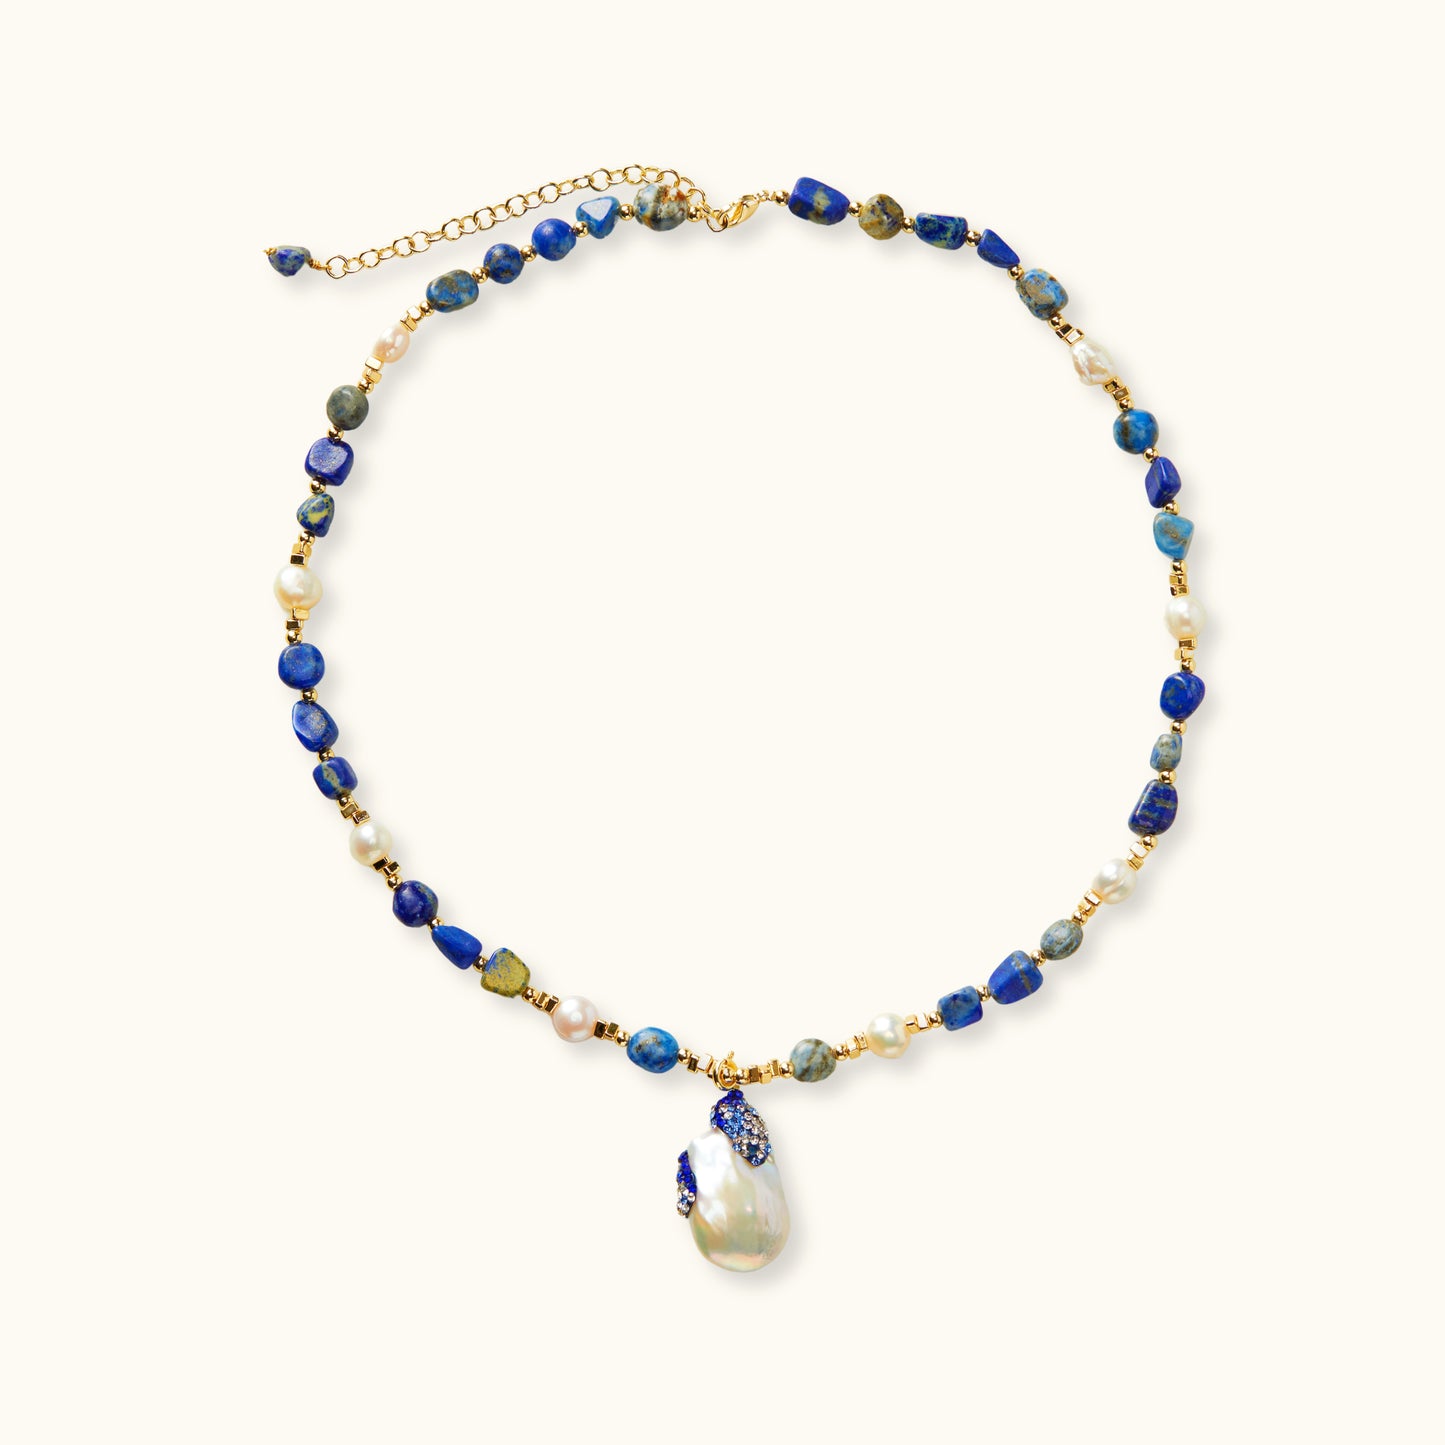 Handcrafted necklace with lapis lazuli and Baroque pearl with gradient blue and white zirconia accents